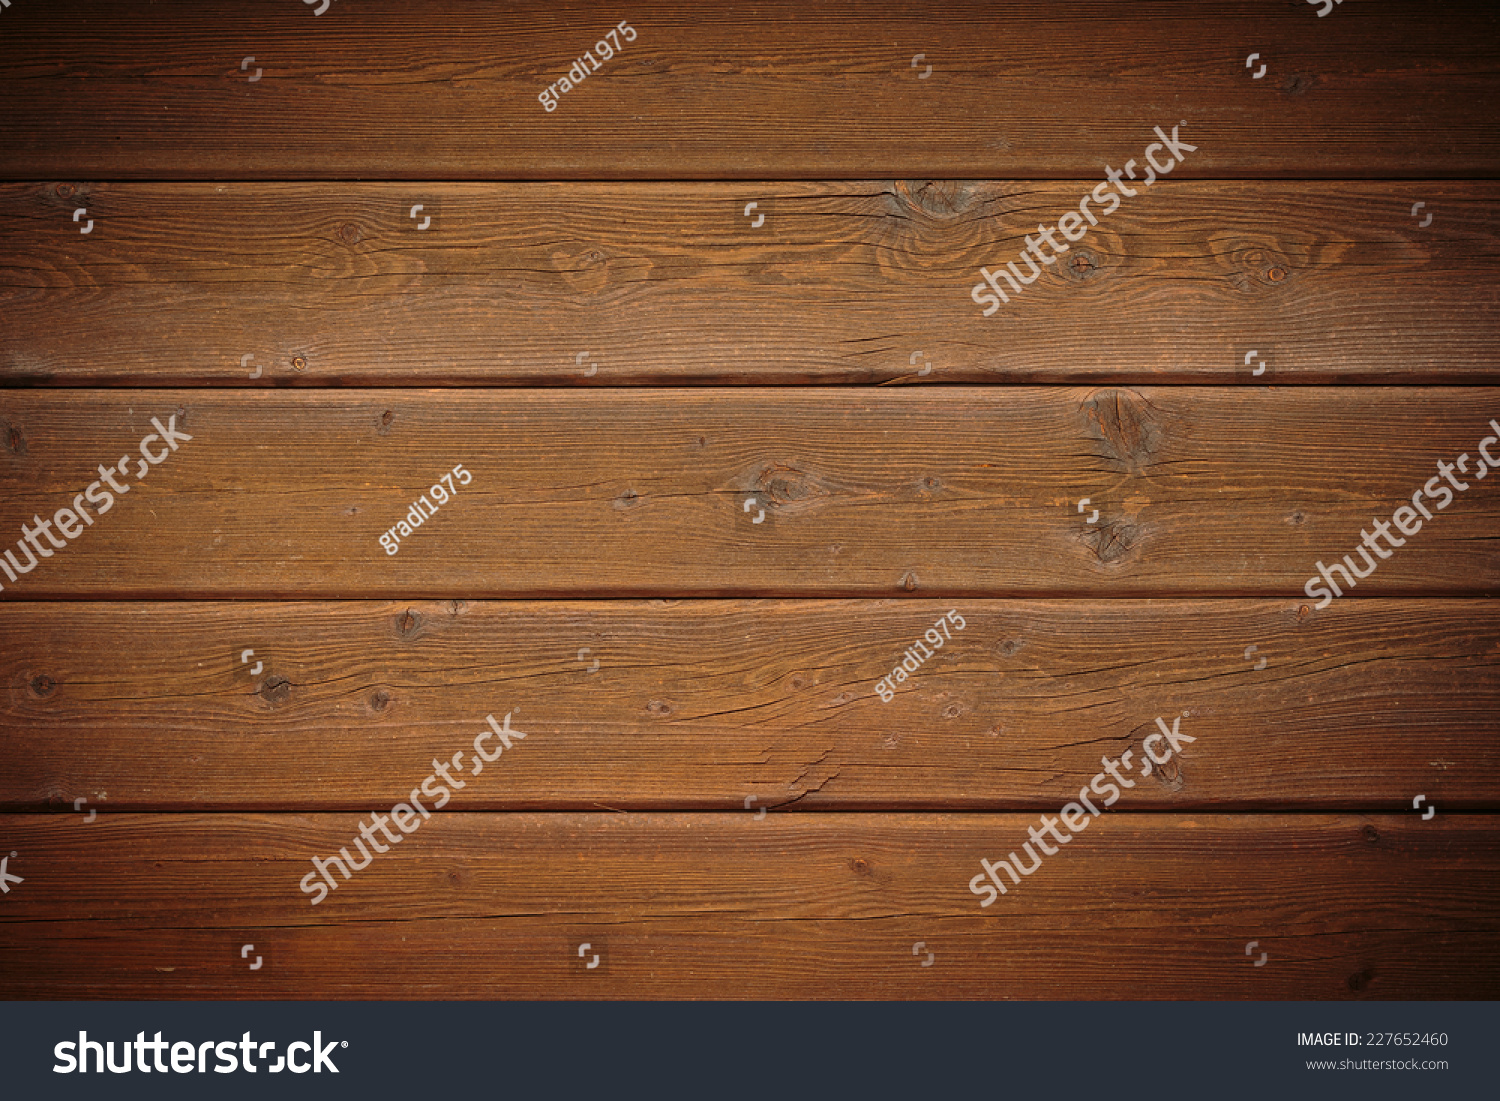 Old Wooden Texture Creative Background Stock Photo ...